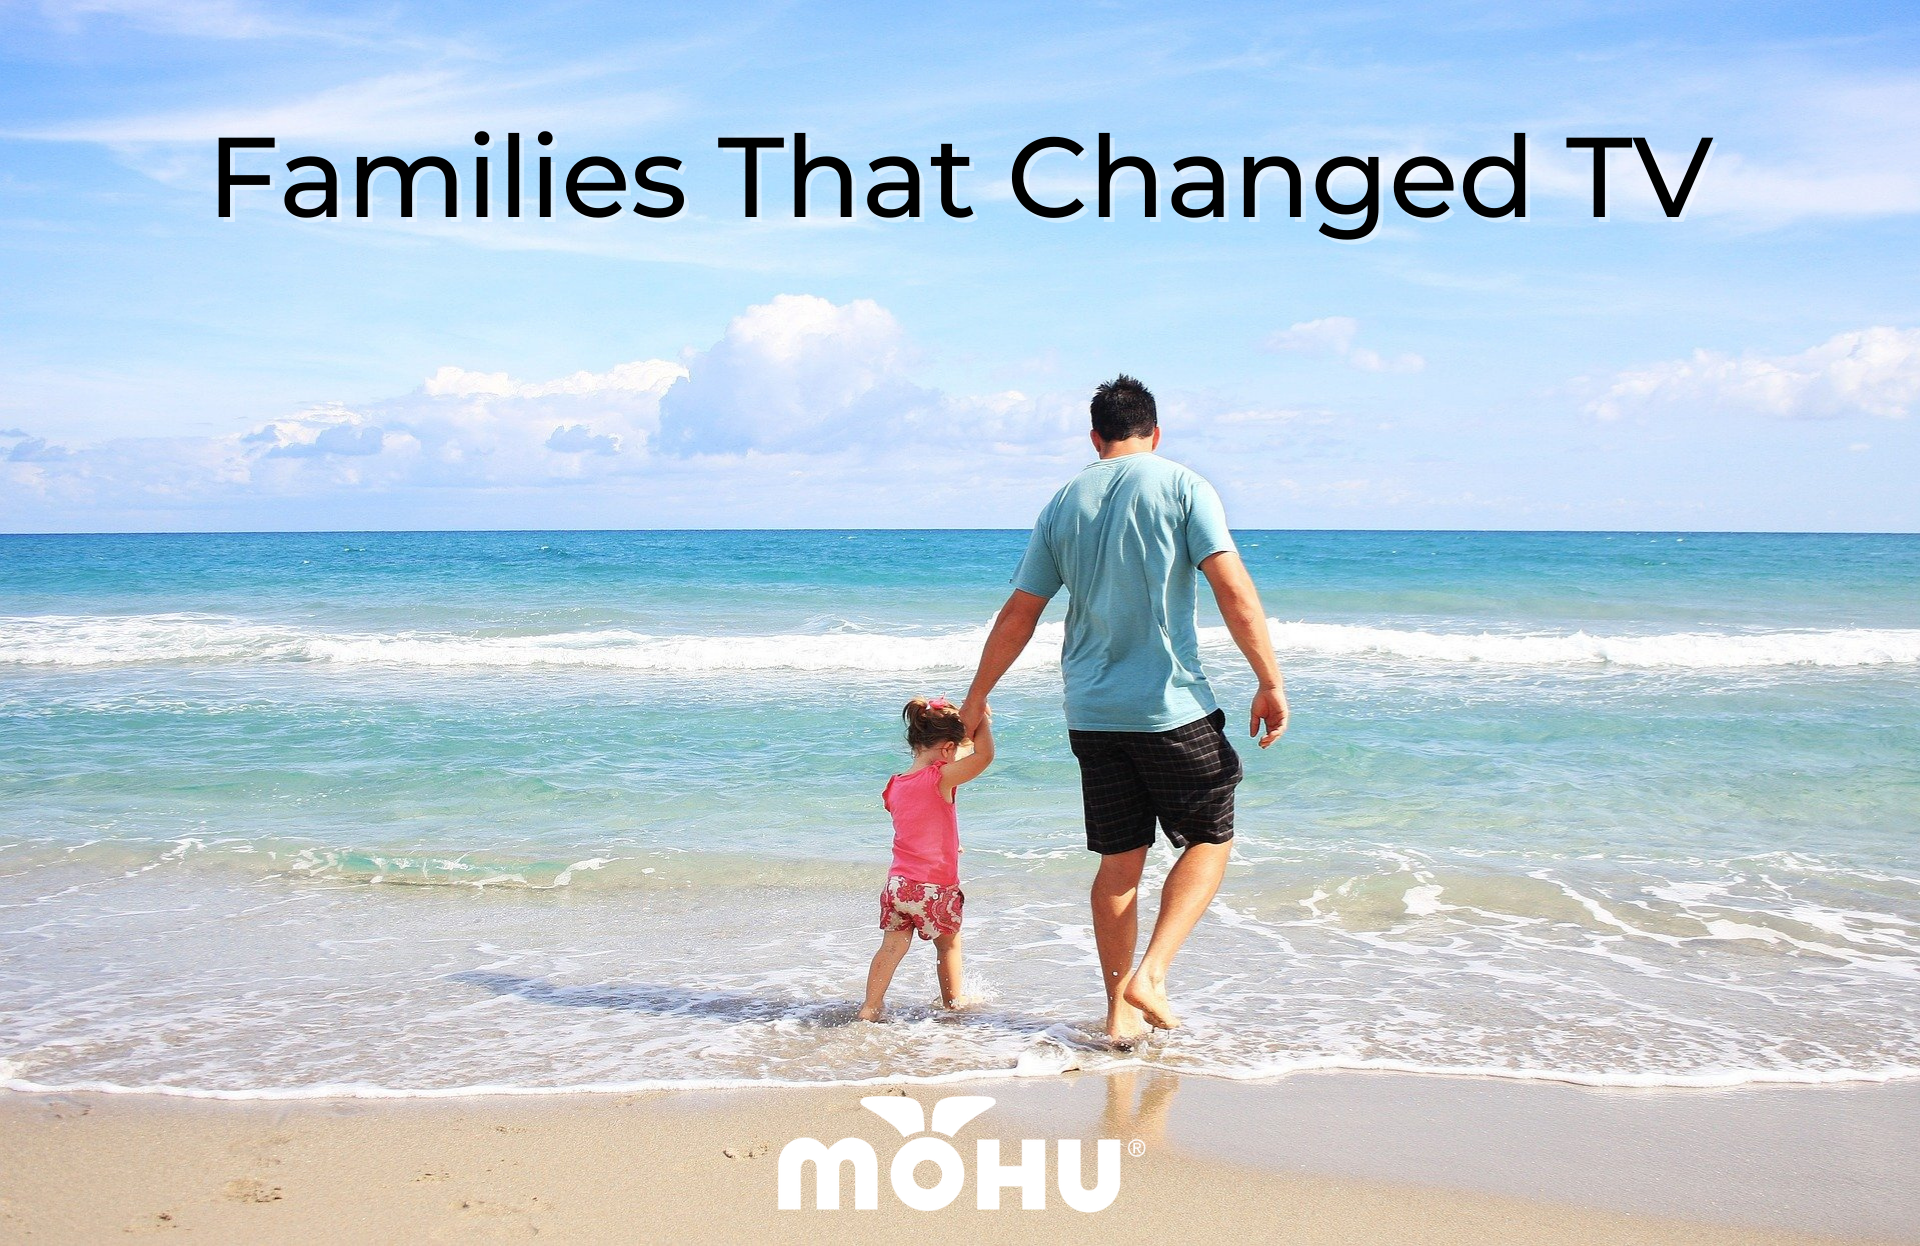 Father and daughter walking along the beach at the ocean, Families That Changed TV, Mohu